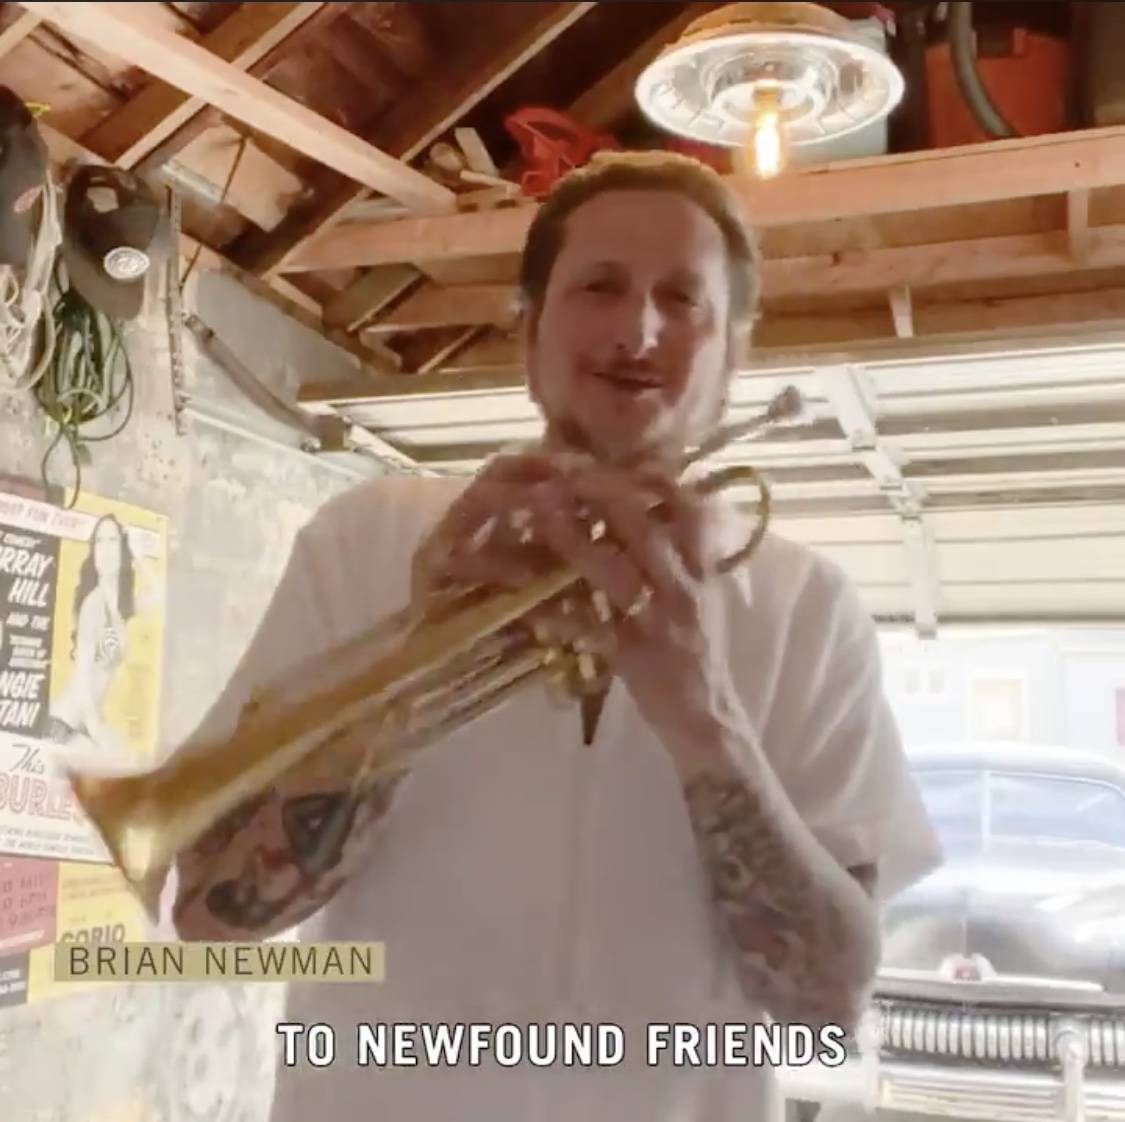 Band leader and trumpet great Brian Newman is shown in a new social media campaign launched by ...